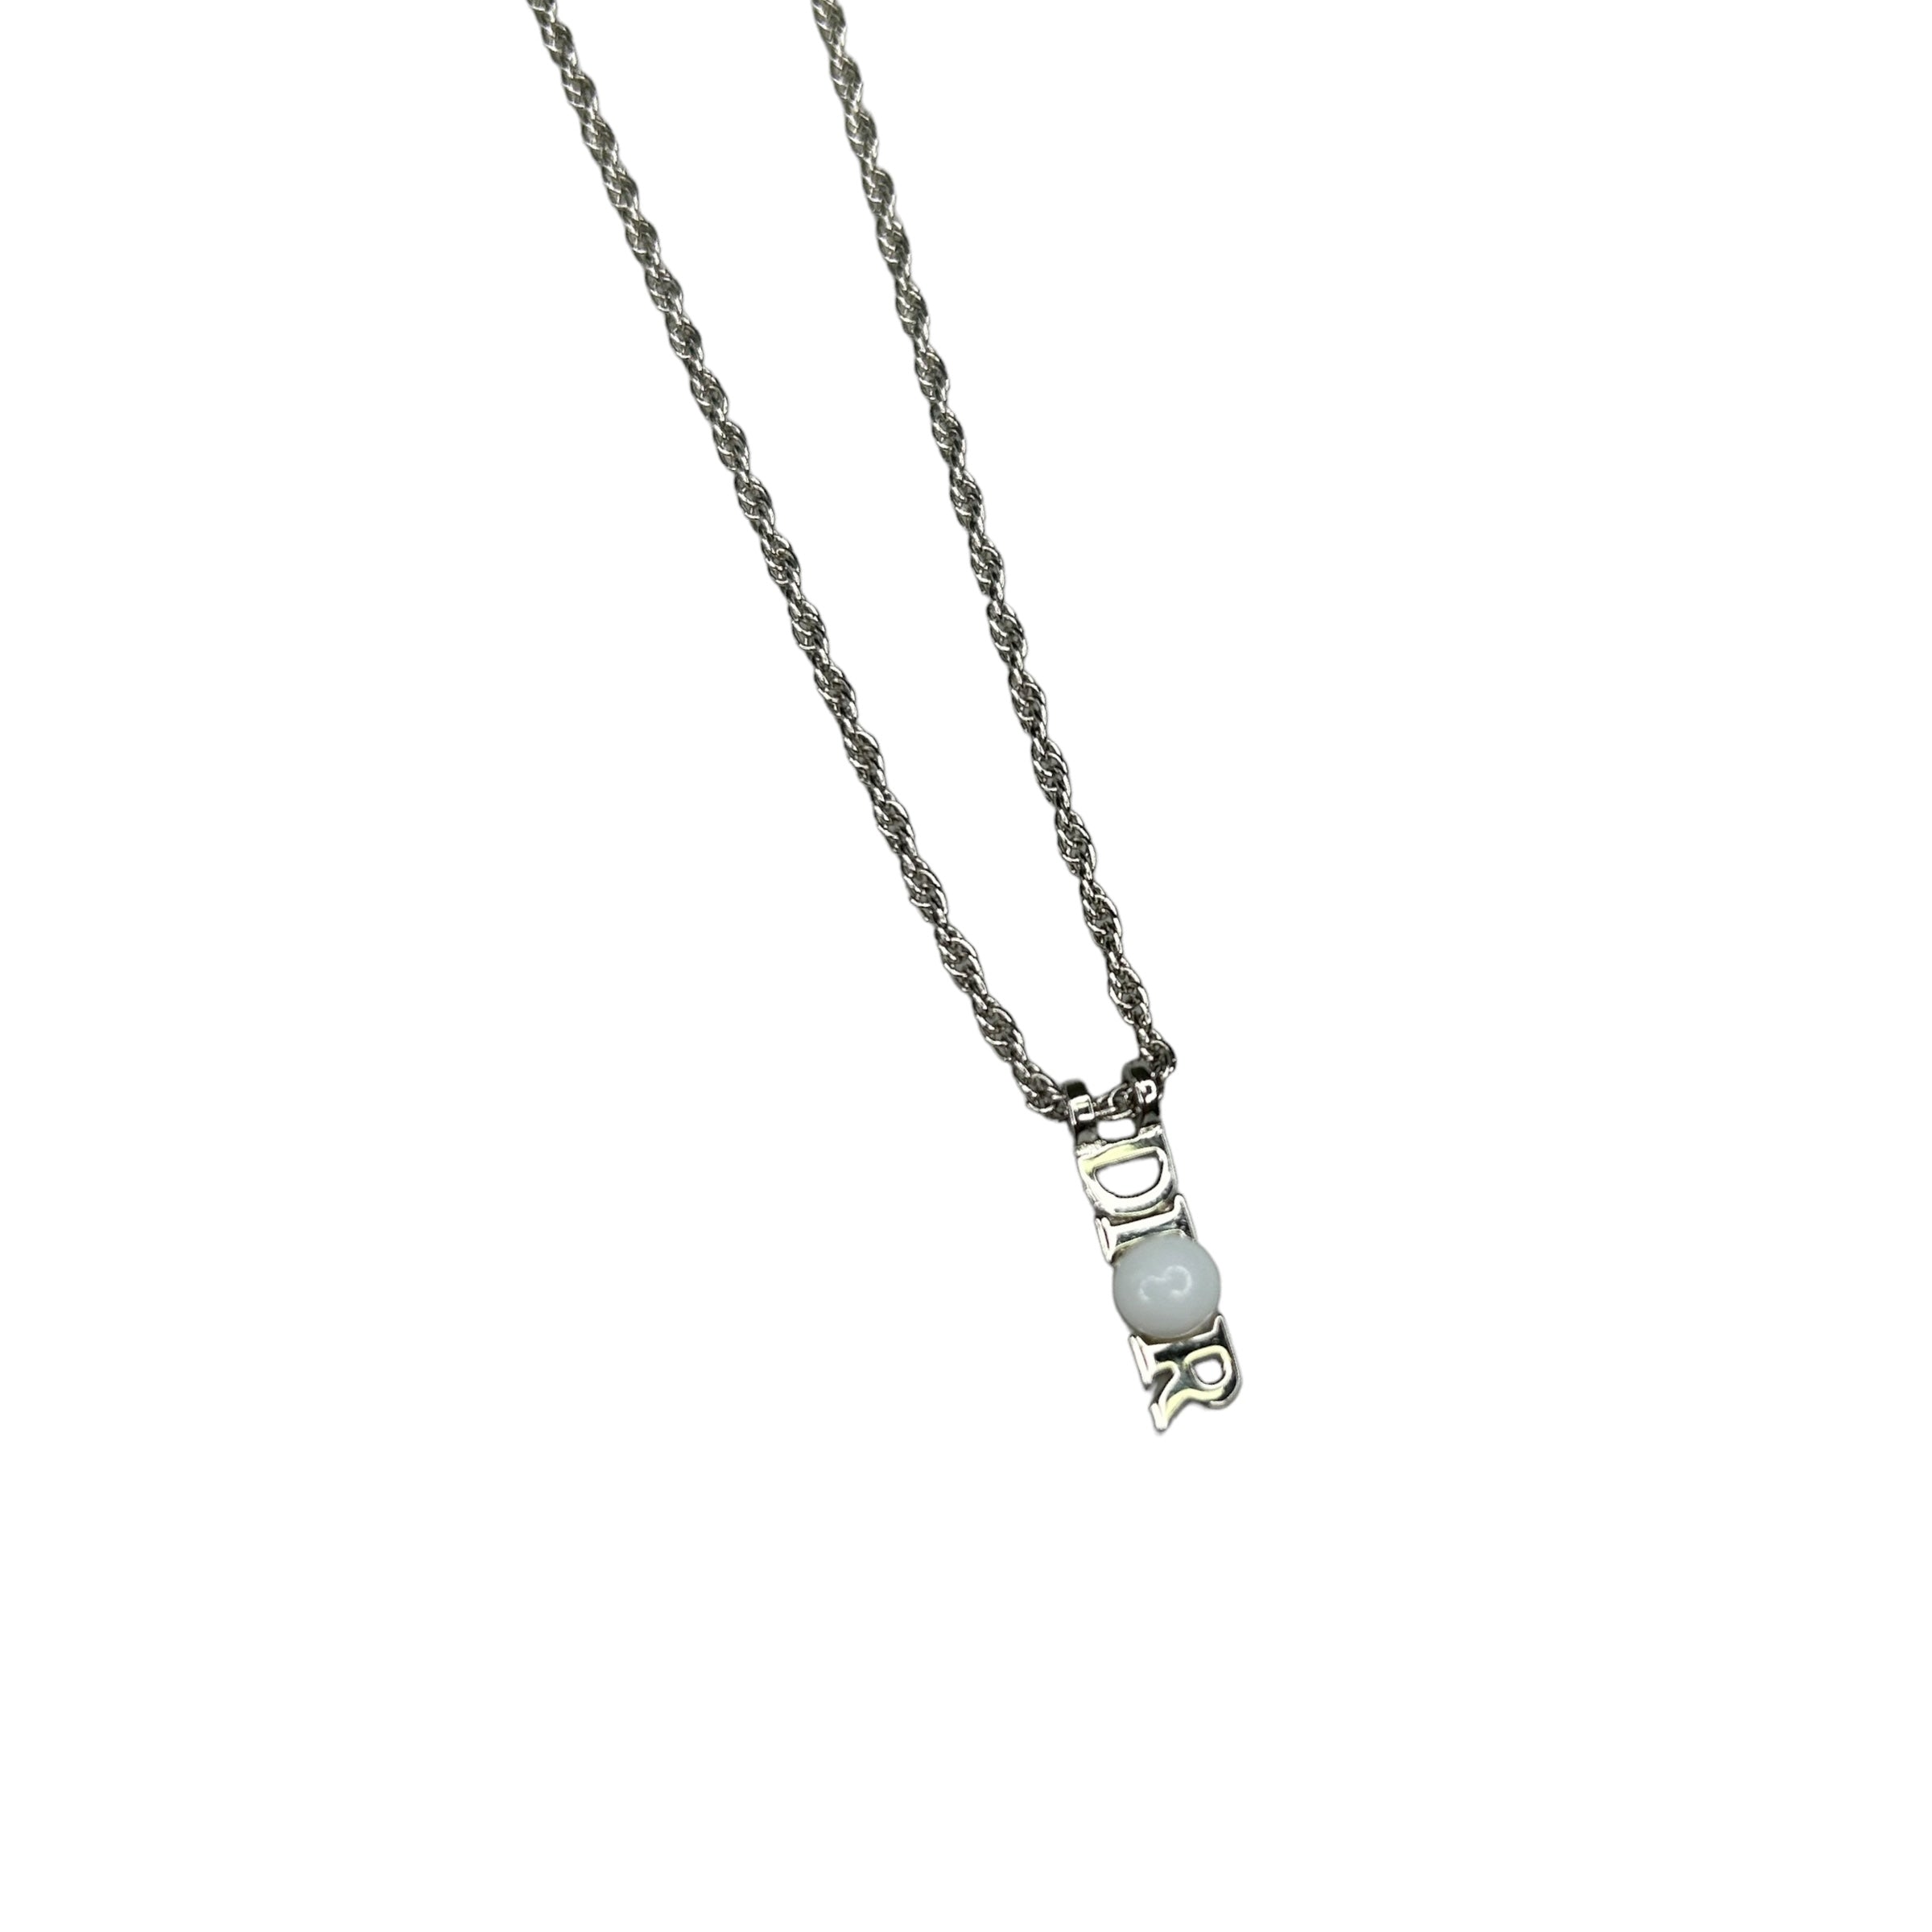 DIOR FAUX PEARL SPELLOUT NECKLACE - SILVER PLATED 03JF8